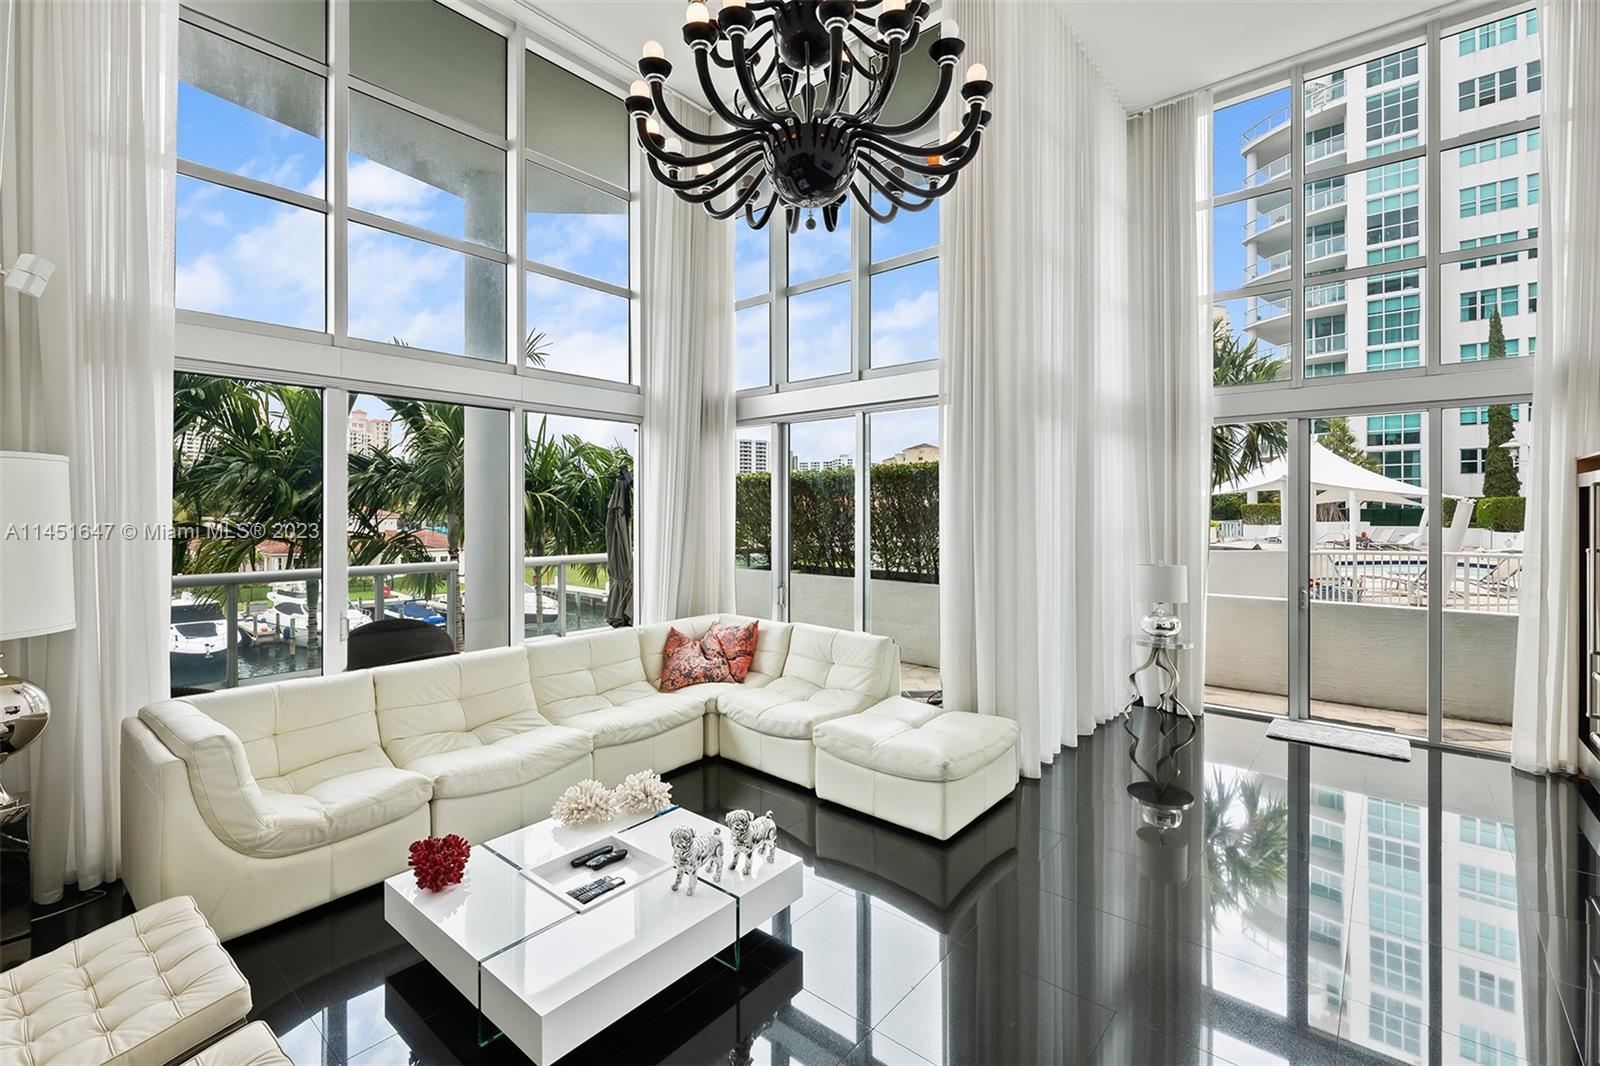 One of a kind two-story unit (5-Bed/3.5Ba + Loft) in the heart of Aventura where you can walk to the